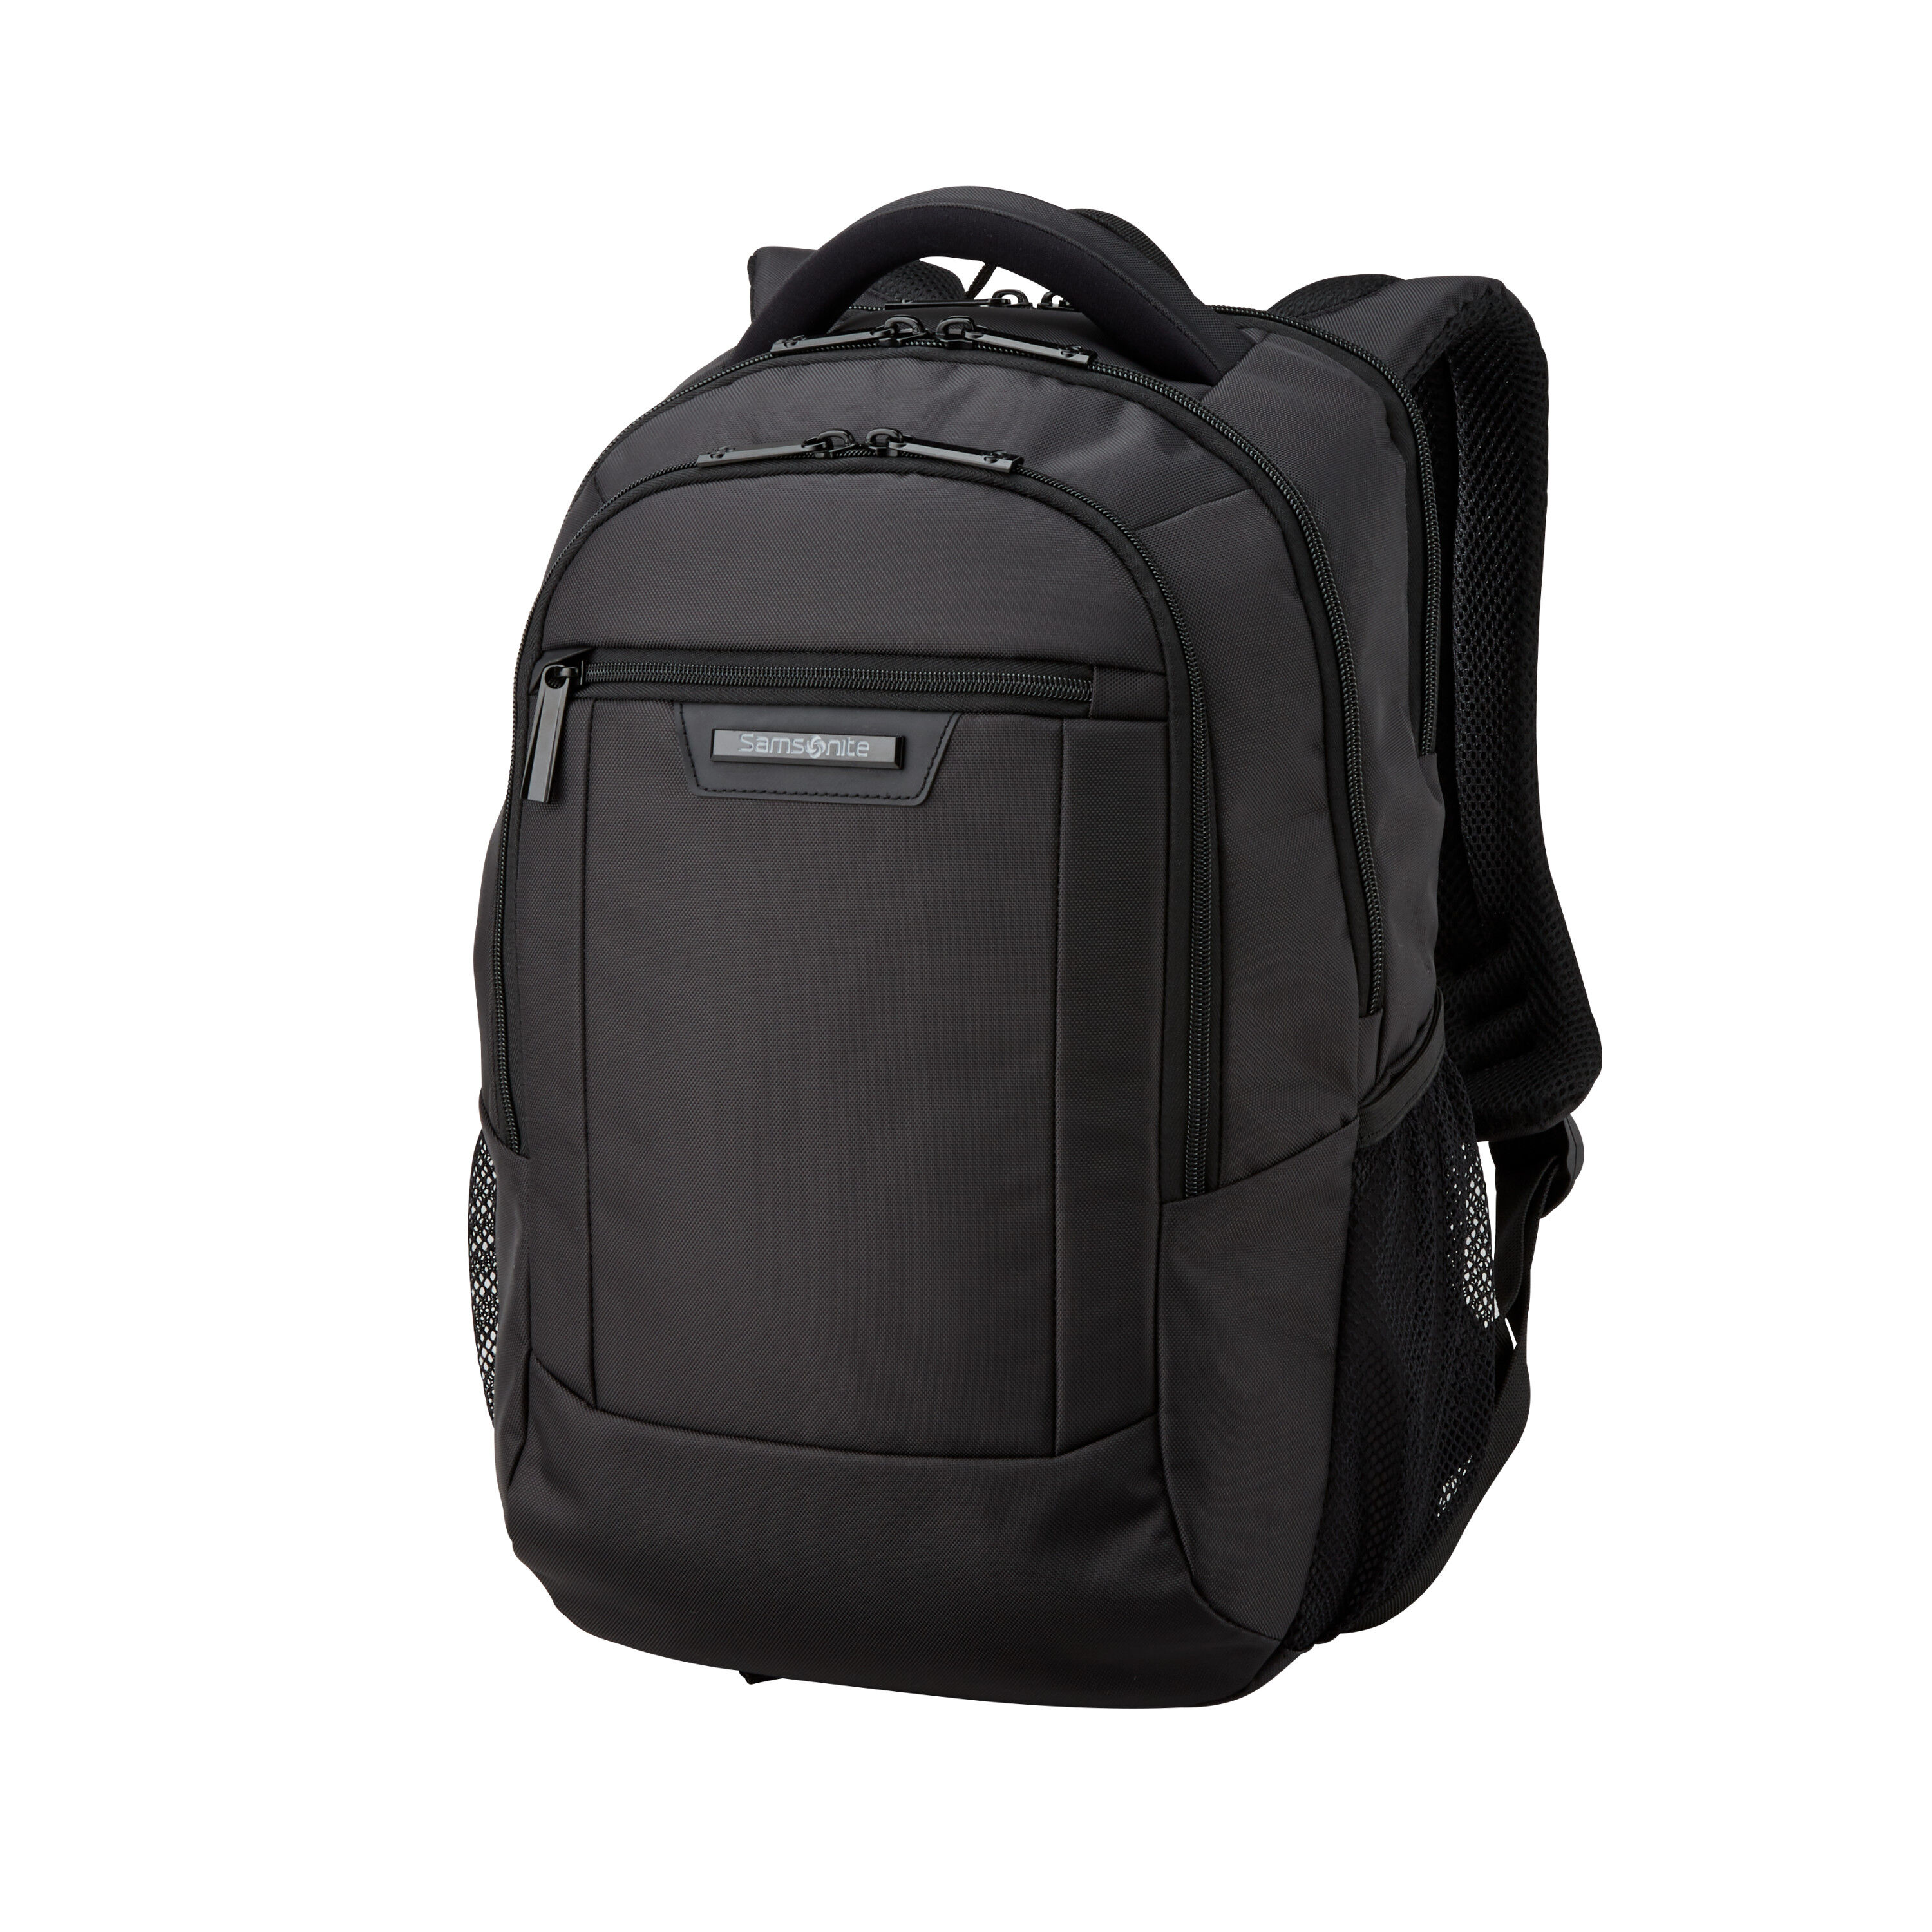 Buy Classic Business 2.0 Everyday Backpack for N/A 0.0 | Samsonite US